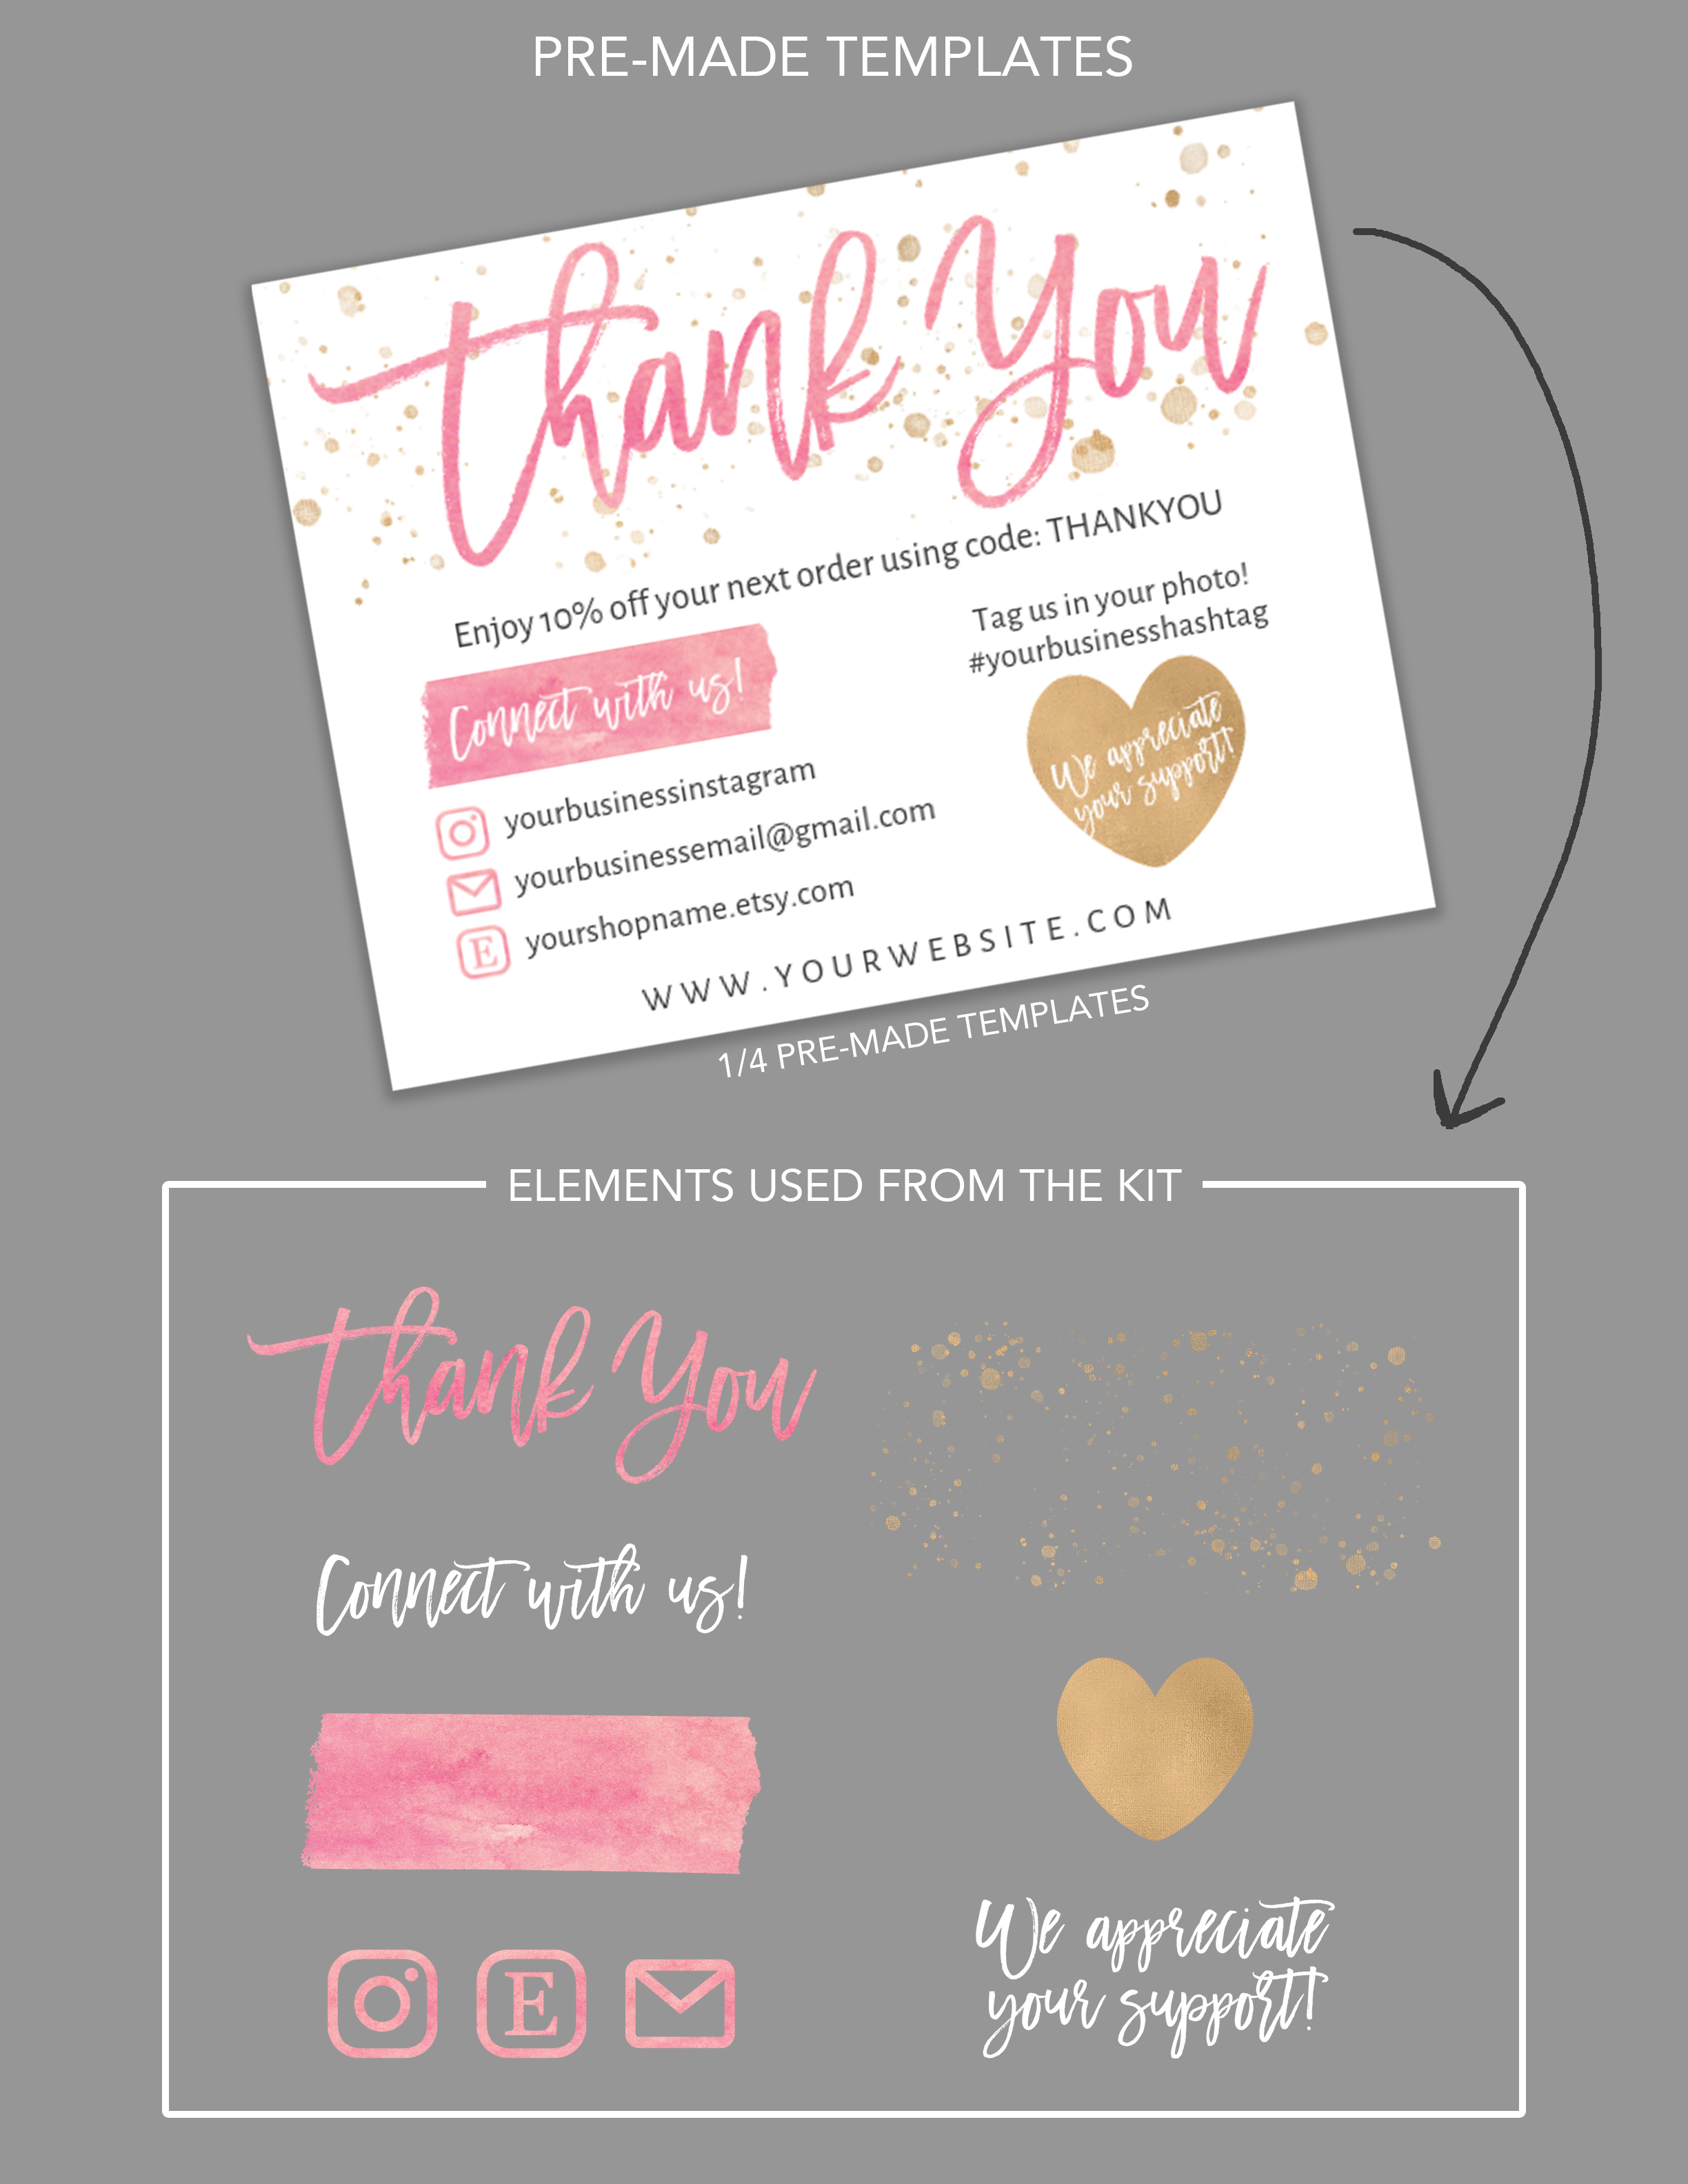 PINK DIY Thank You Card Thank You Card Template Beauty Brand Digital Template Beauty Business Thank You Card Premade TEMPLATE